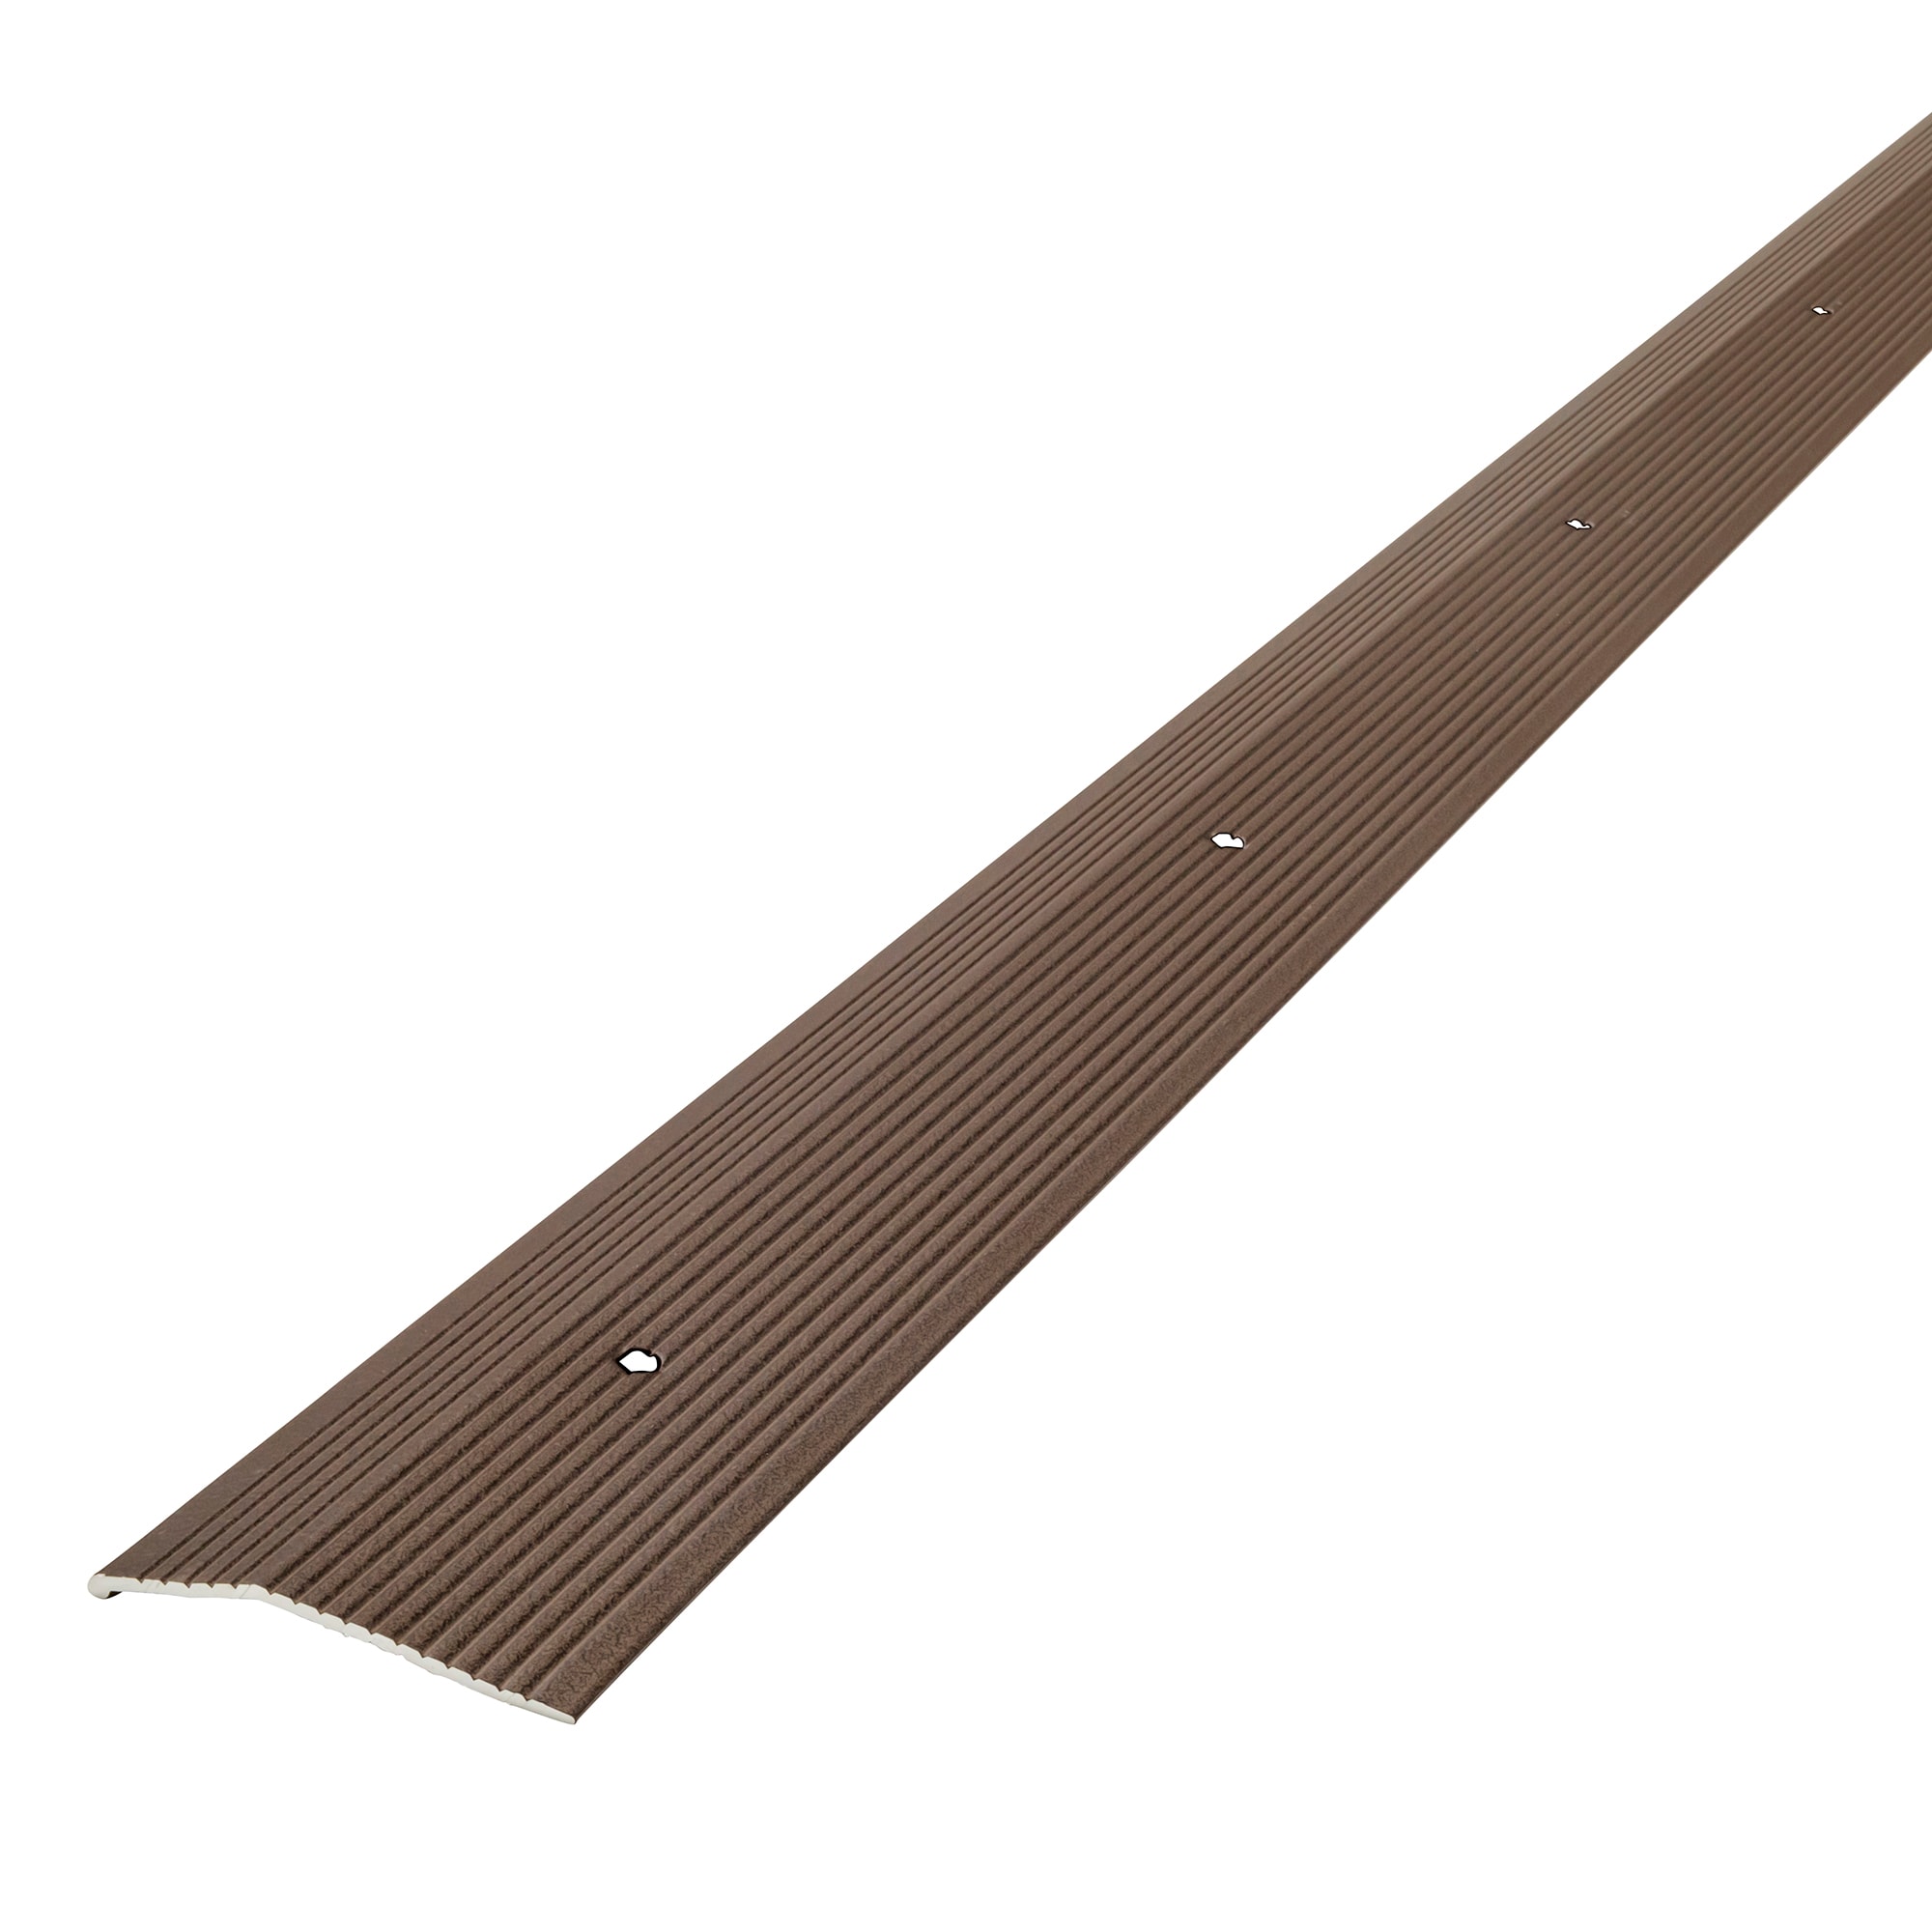 Carpet Edging Trim Strip Self Adhesive, PVC Floor Transition Strip for Wood  to Carpet, Edge Safety Protector, Home Office School Shop (Color : Brown